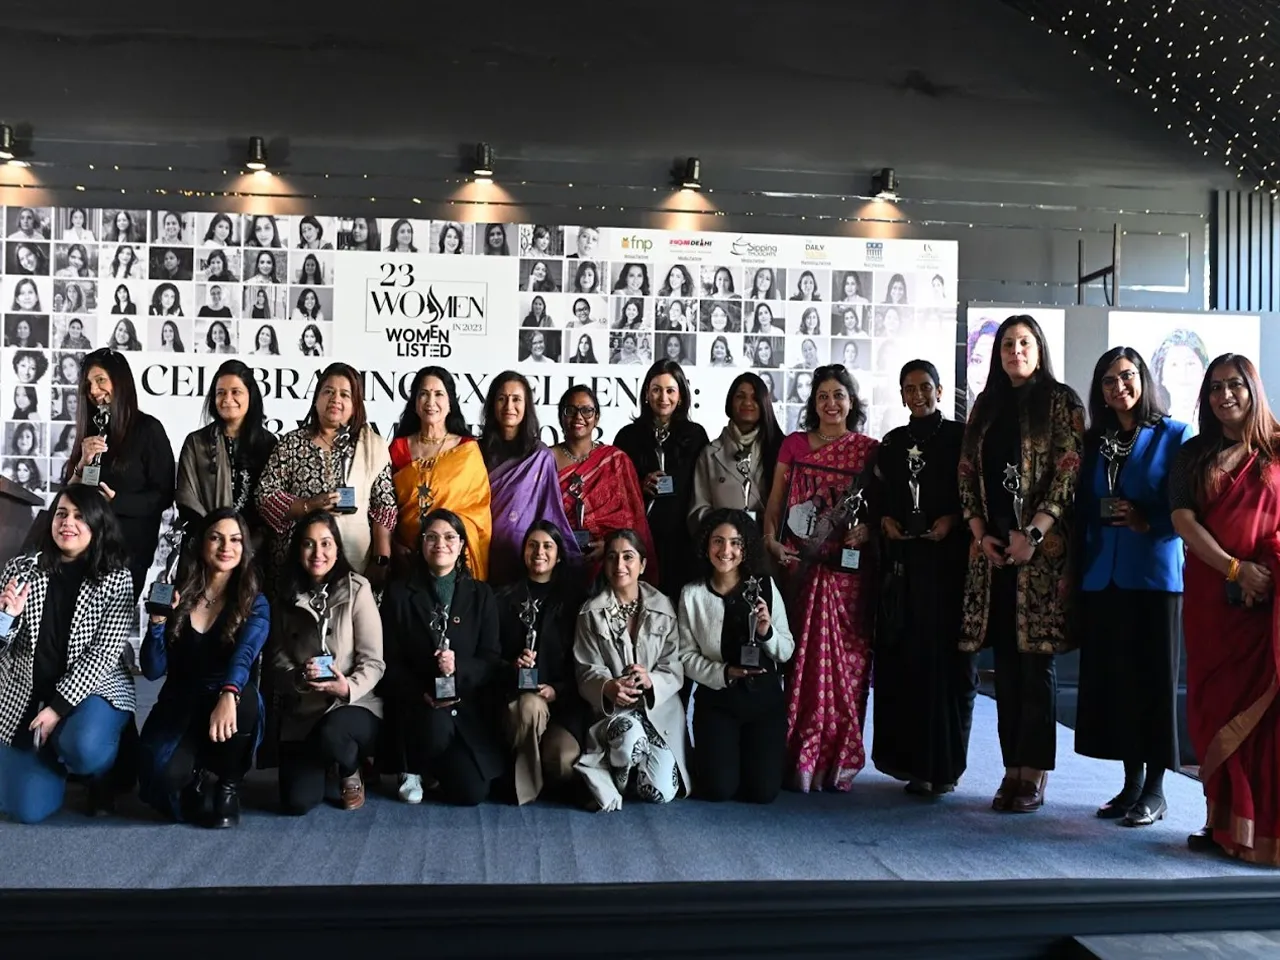 Women Listed hosts Celebrating Excellence: 23 Women in 2023 Awards to honour women in various fields